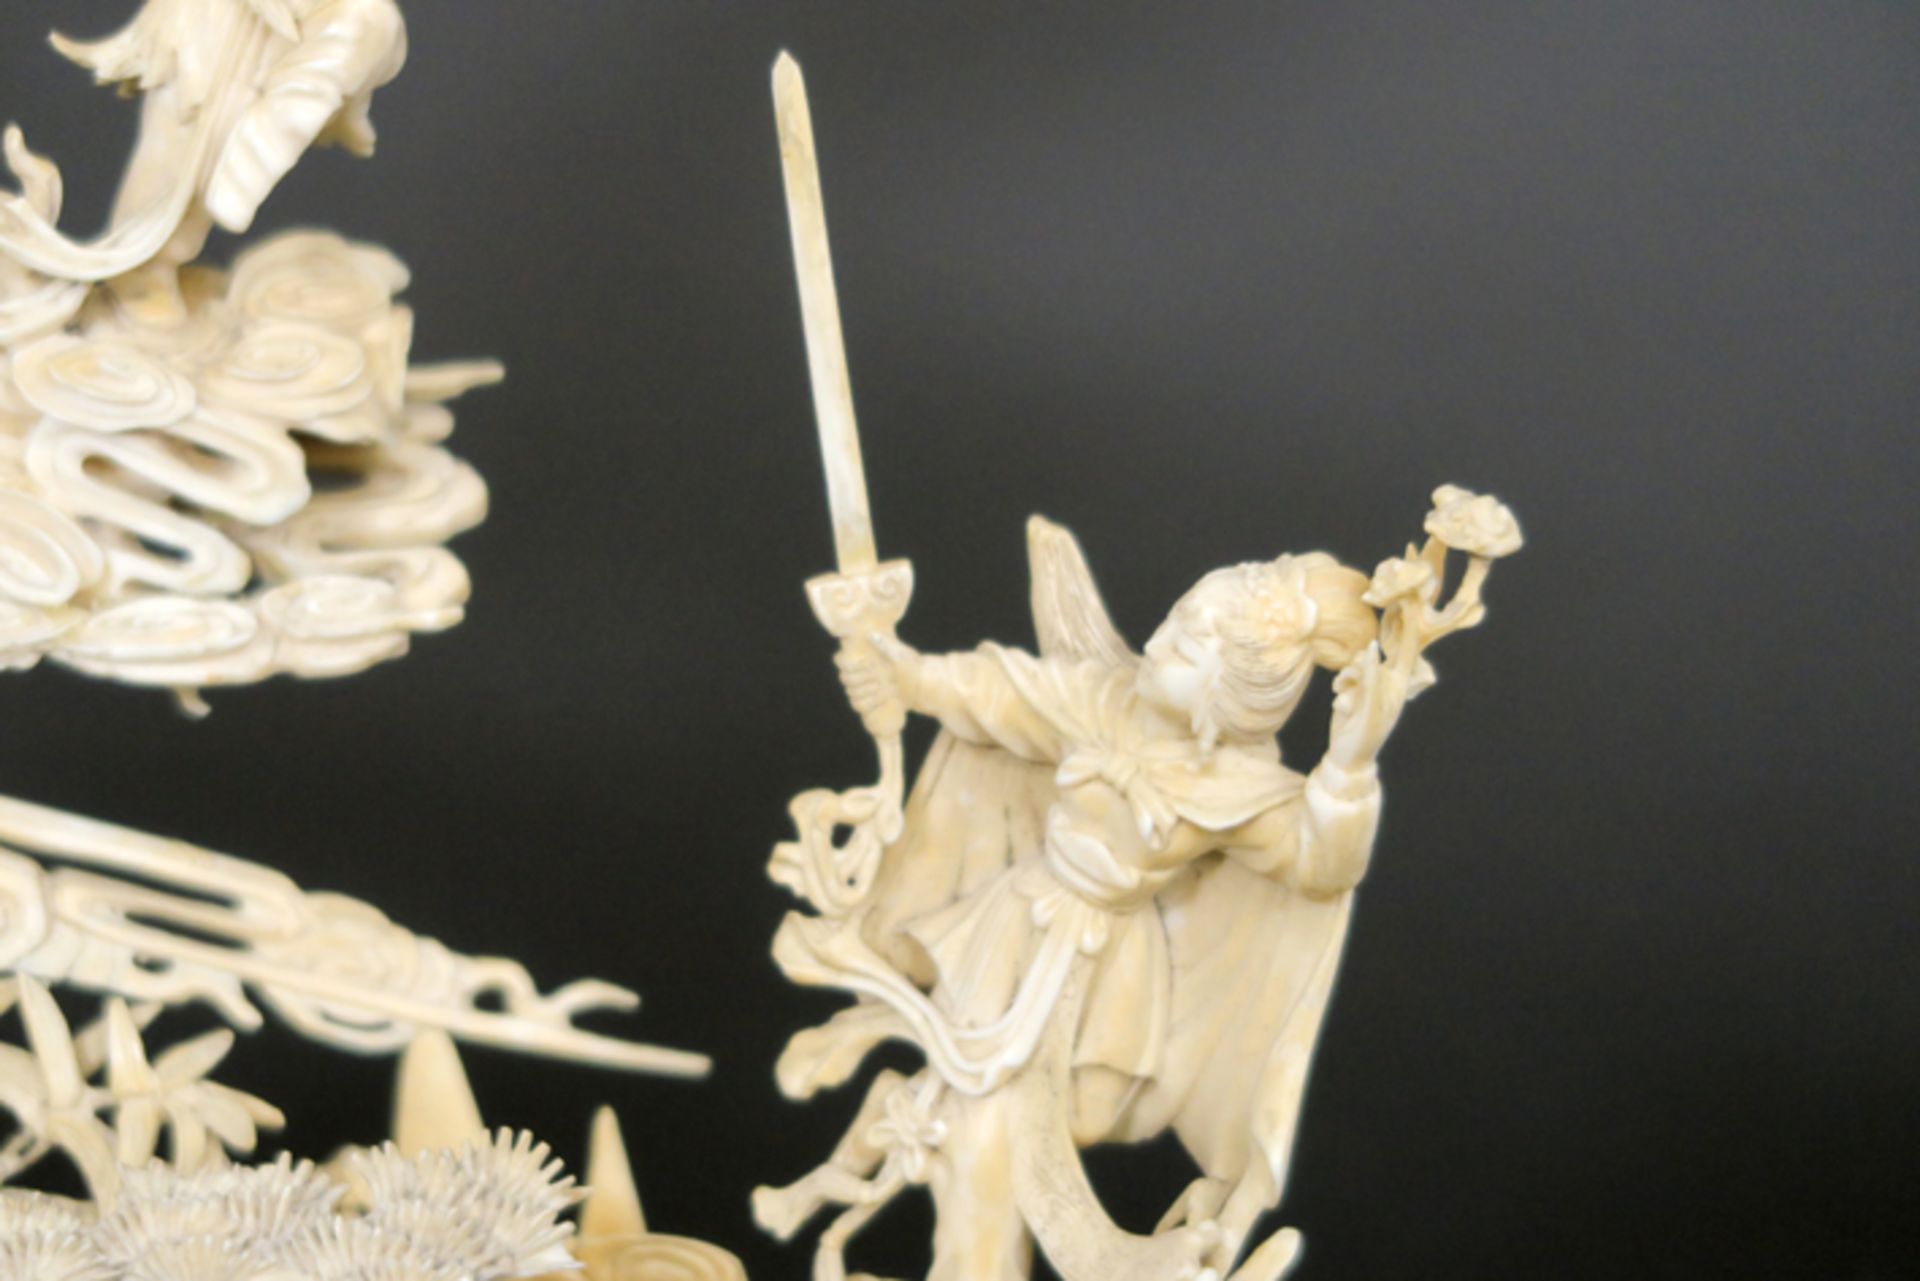 19th Cent. Chinese "Sage with three figures in the clouds" sculpture in ivory - - [...] - Image 6 of 6